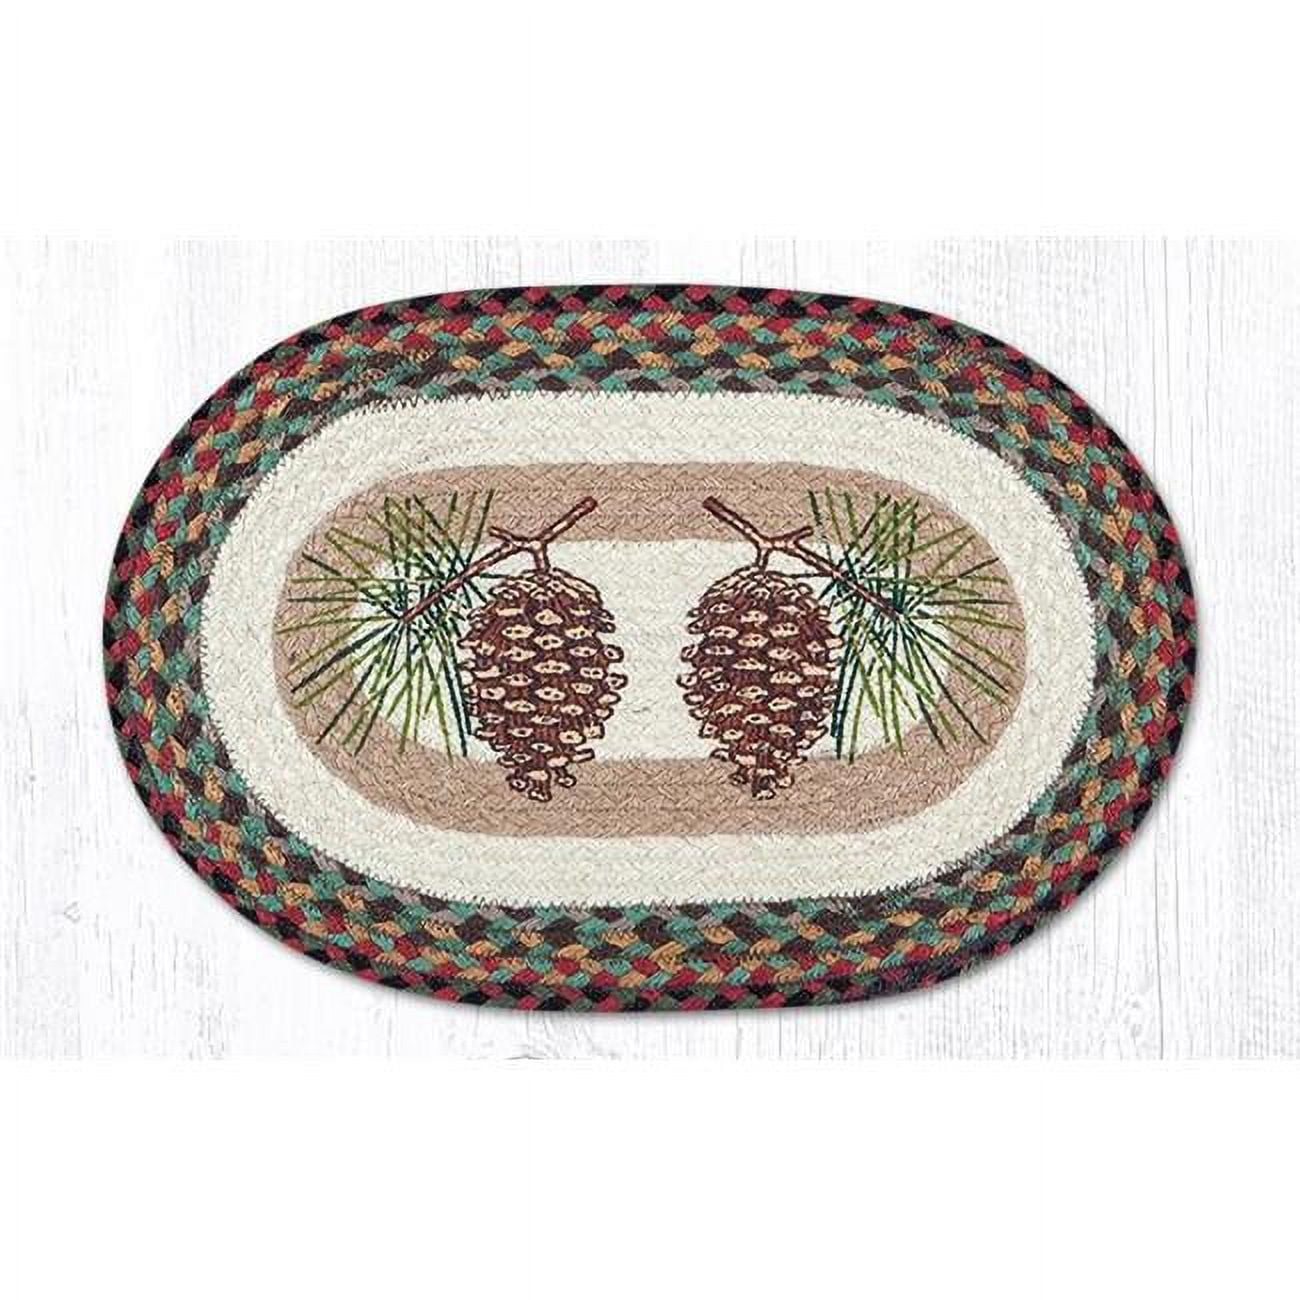 Capitol Importing 48-081p 13 X 19 In. Pinecone Printed Placemat Rug